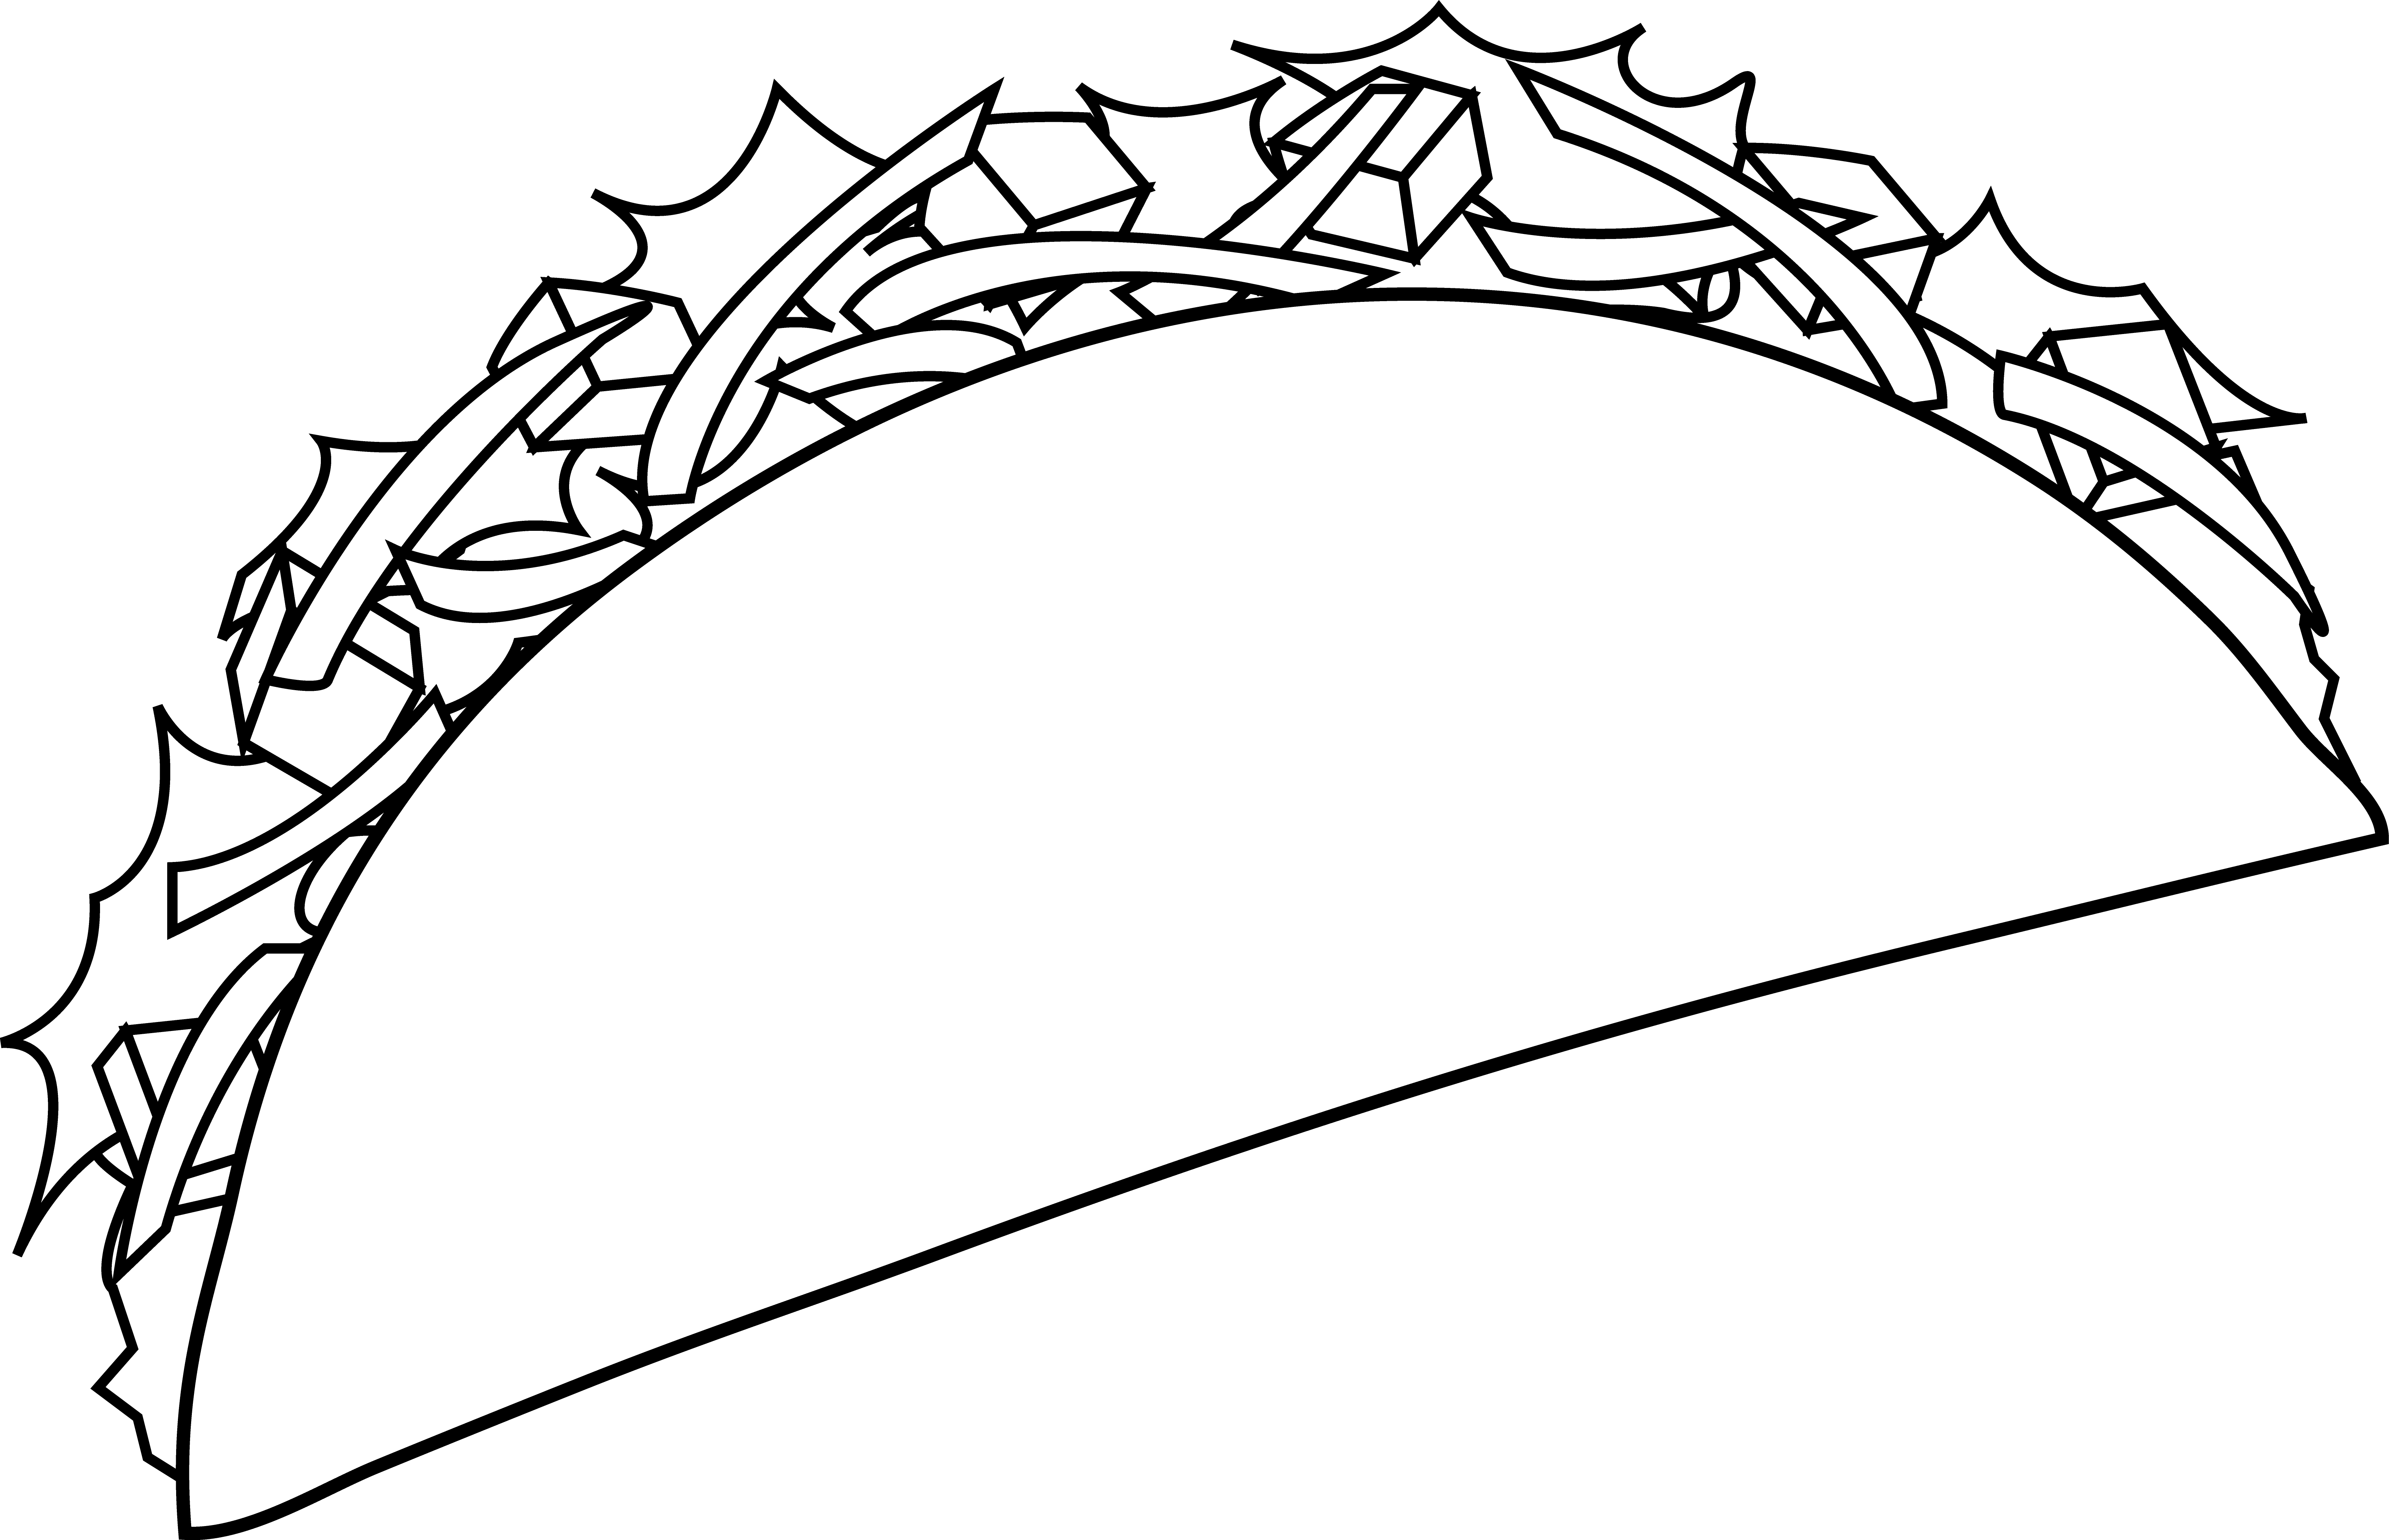 Taco black and white. Tacos clipart drawn